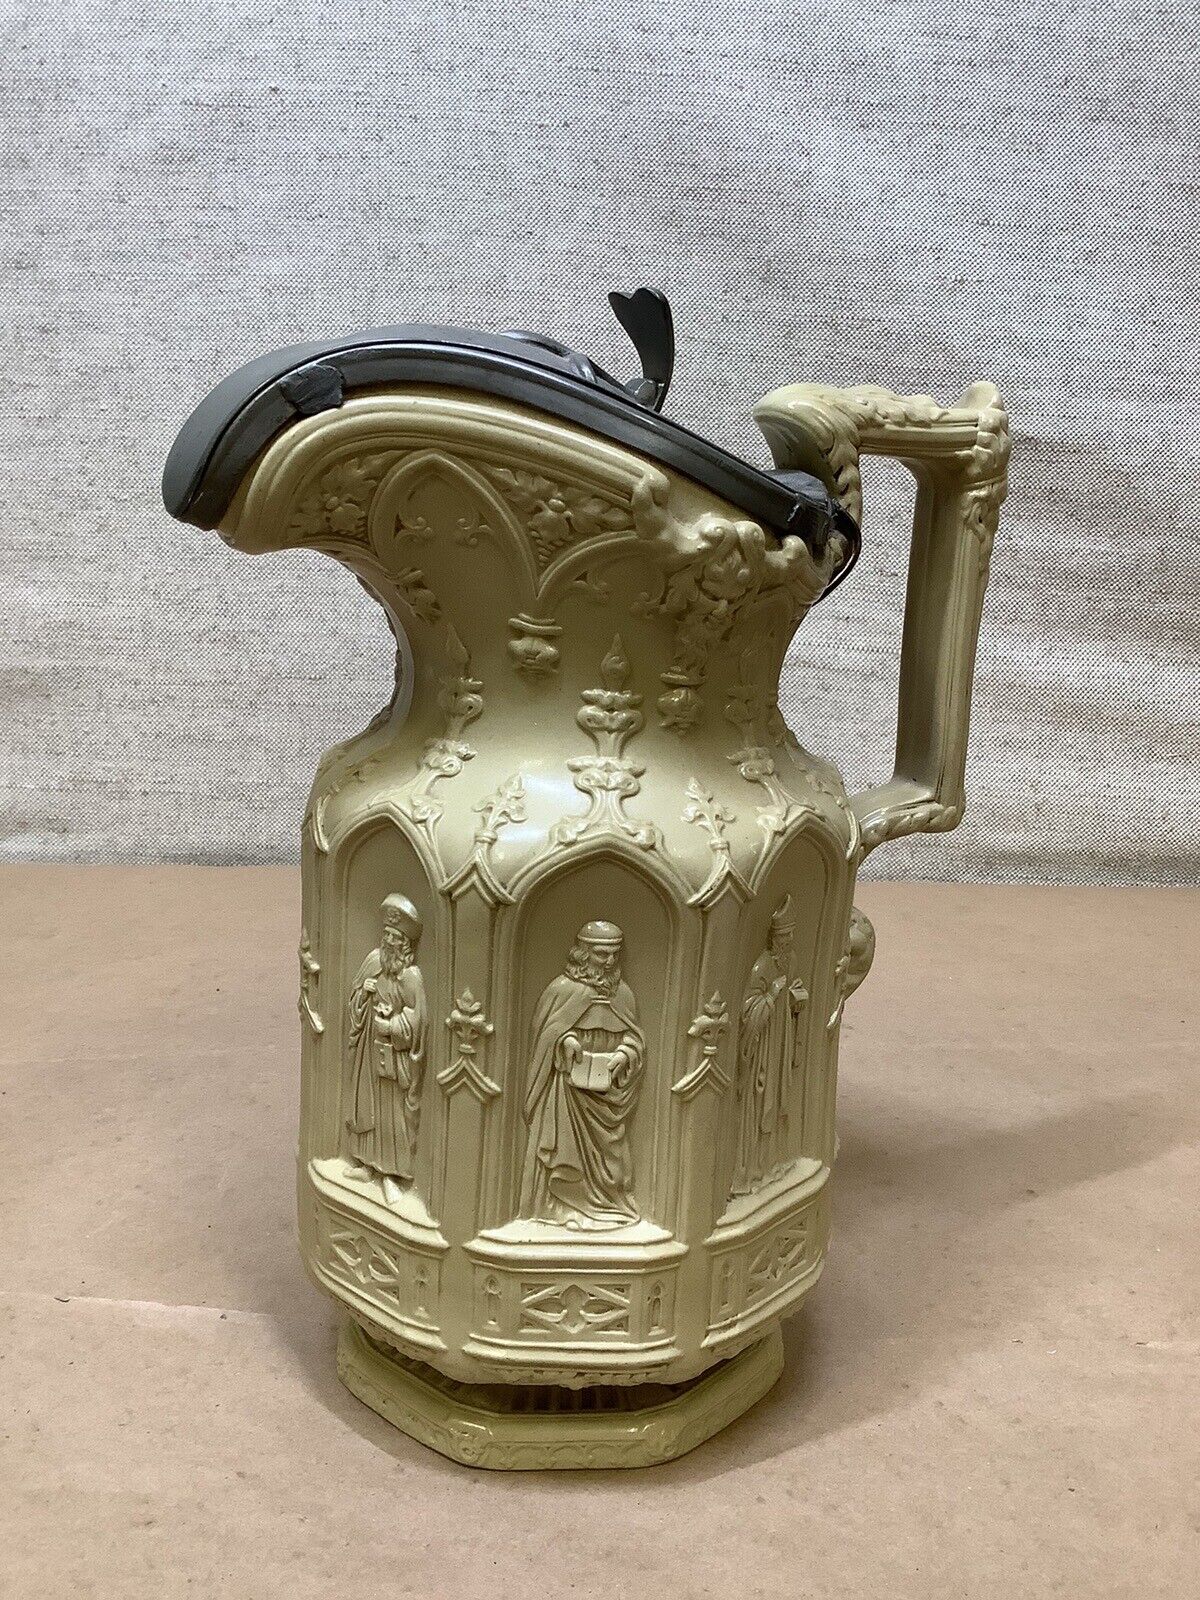 Antique Victorian Apostle Jug by Charles Meigh in Stoneware with Pewter Lid 1842